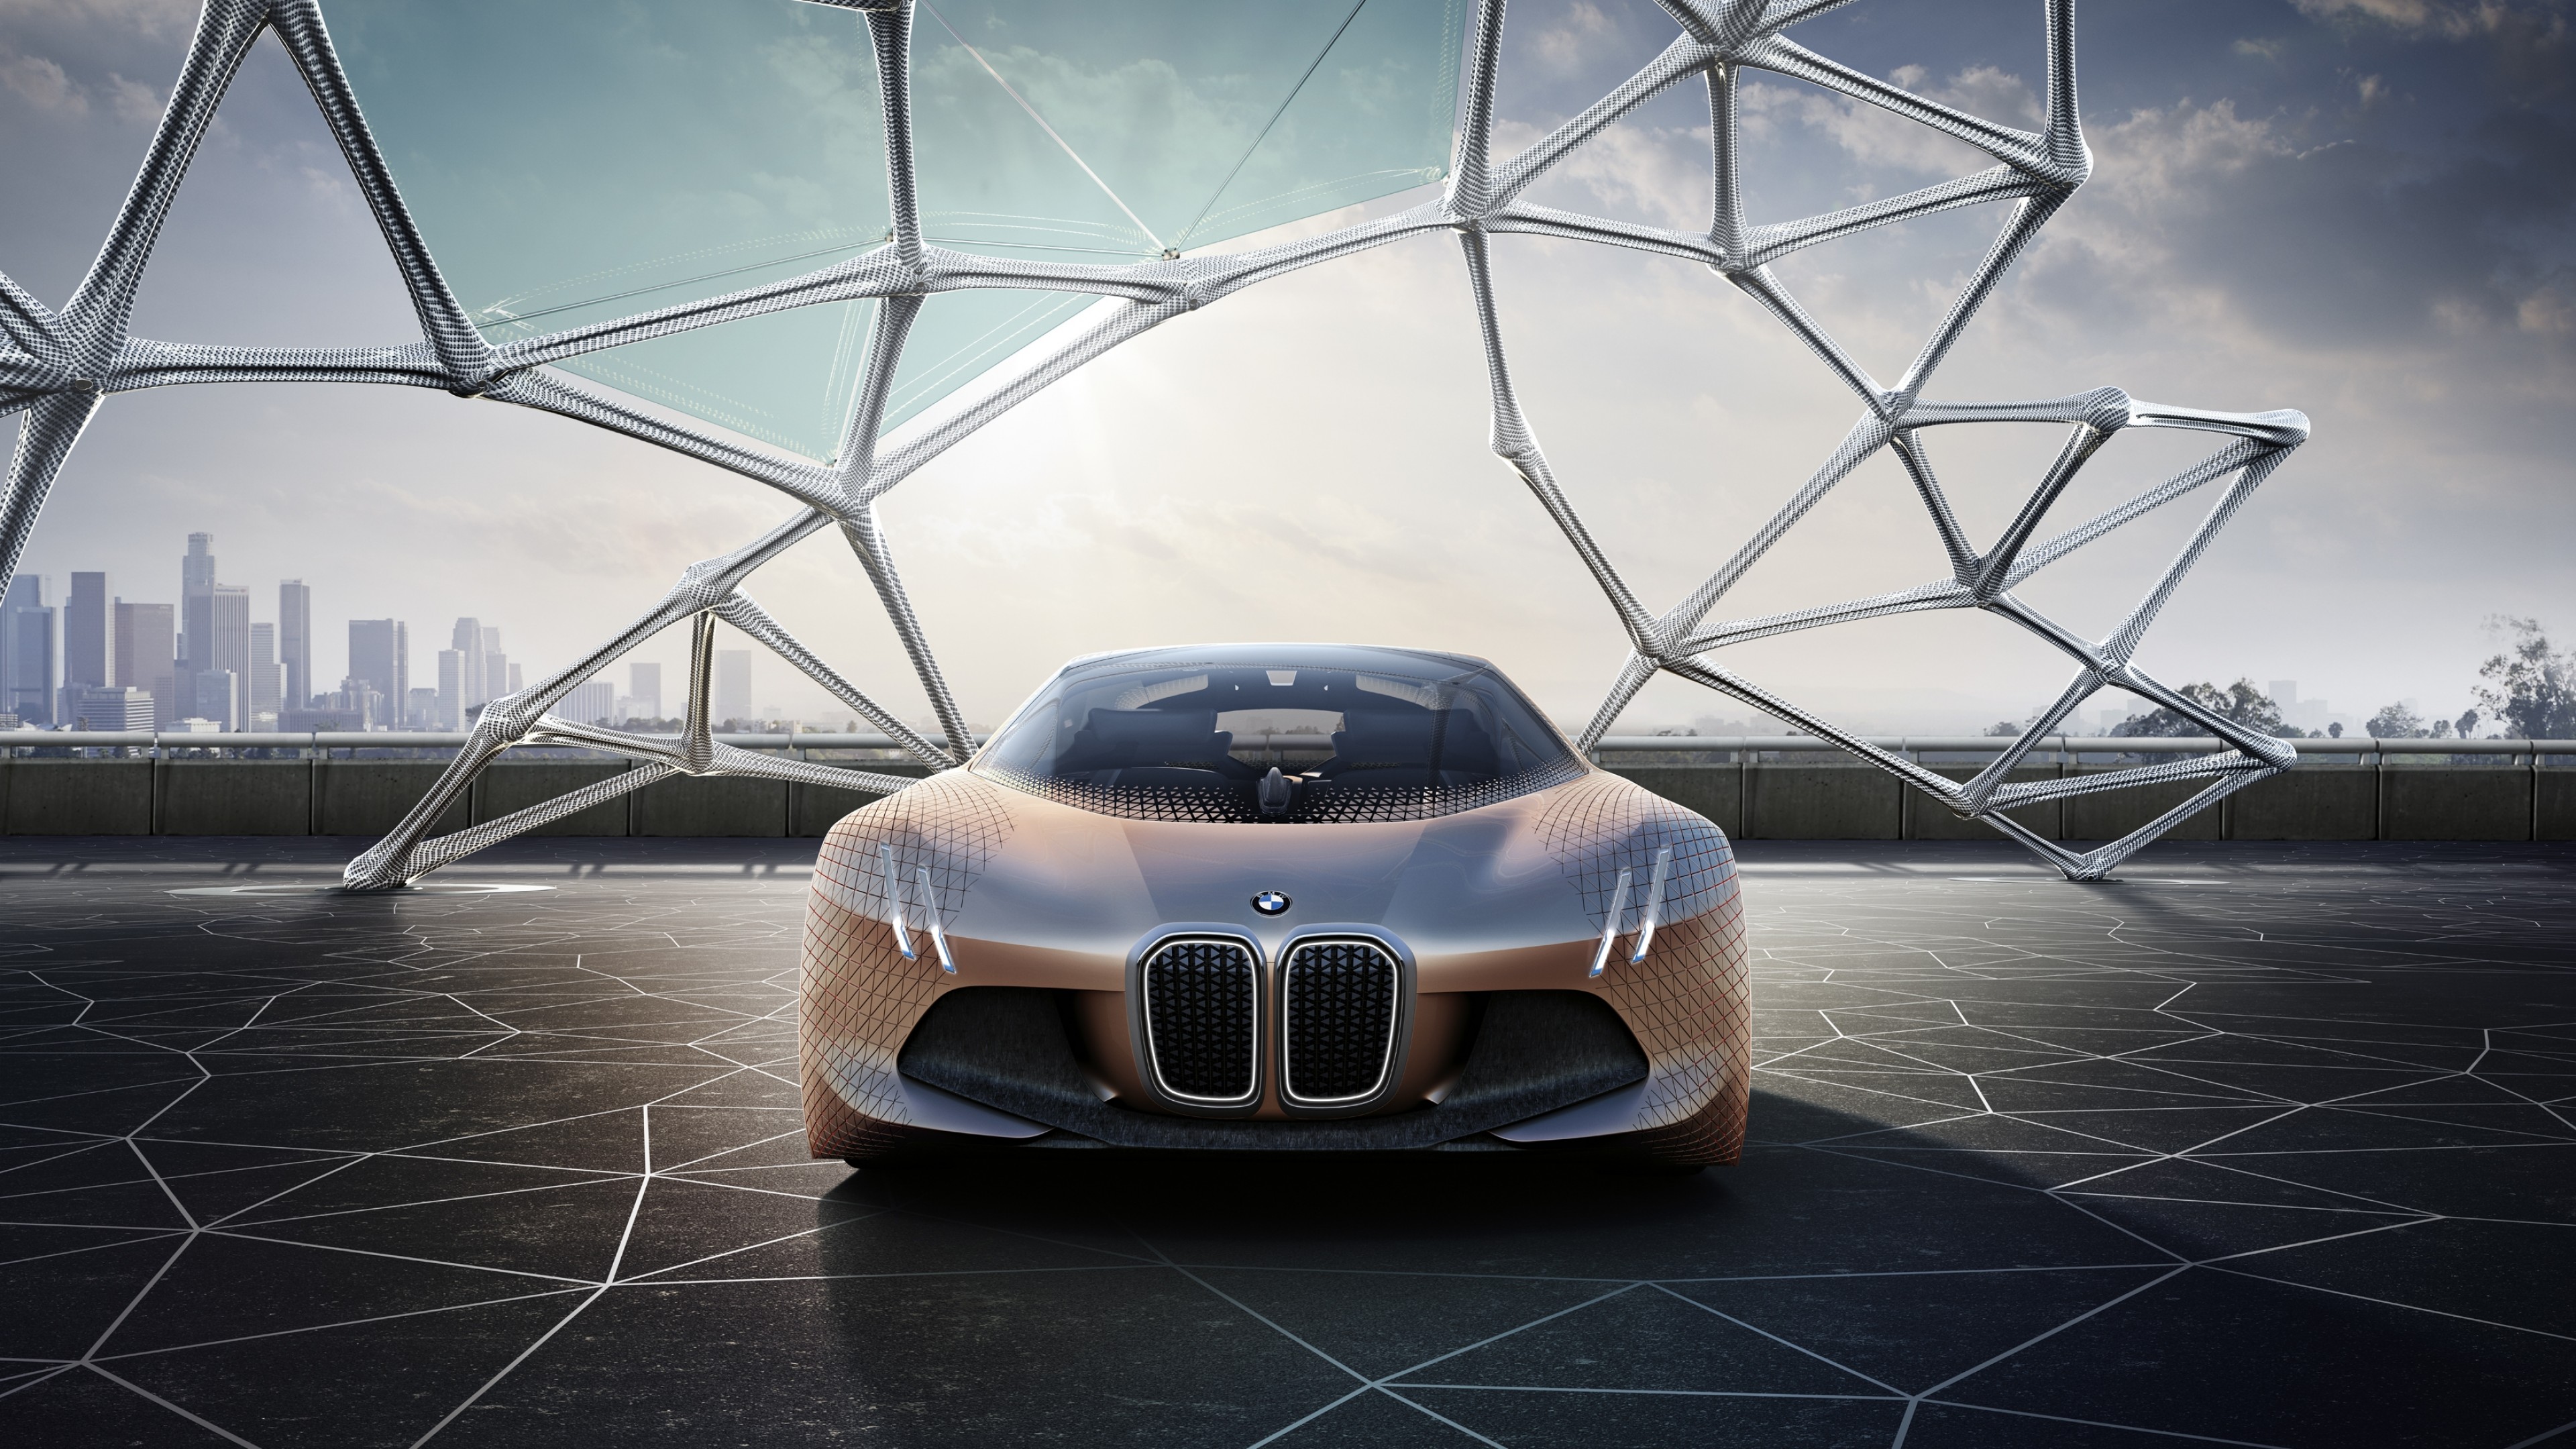 Wallpaper BMW Vision Next 100, future cars, luxury cars, Cars & Bikes #9366  - Page 4